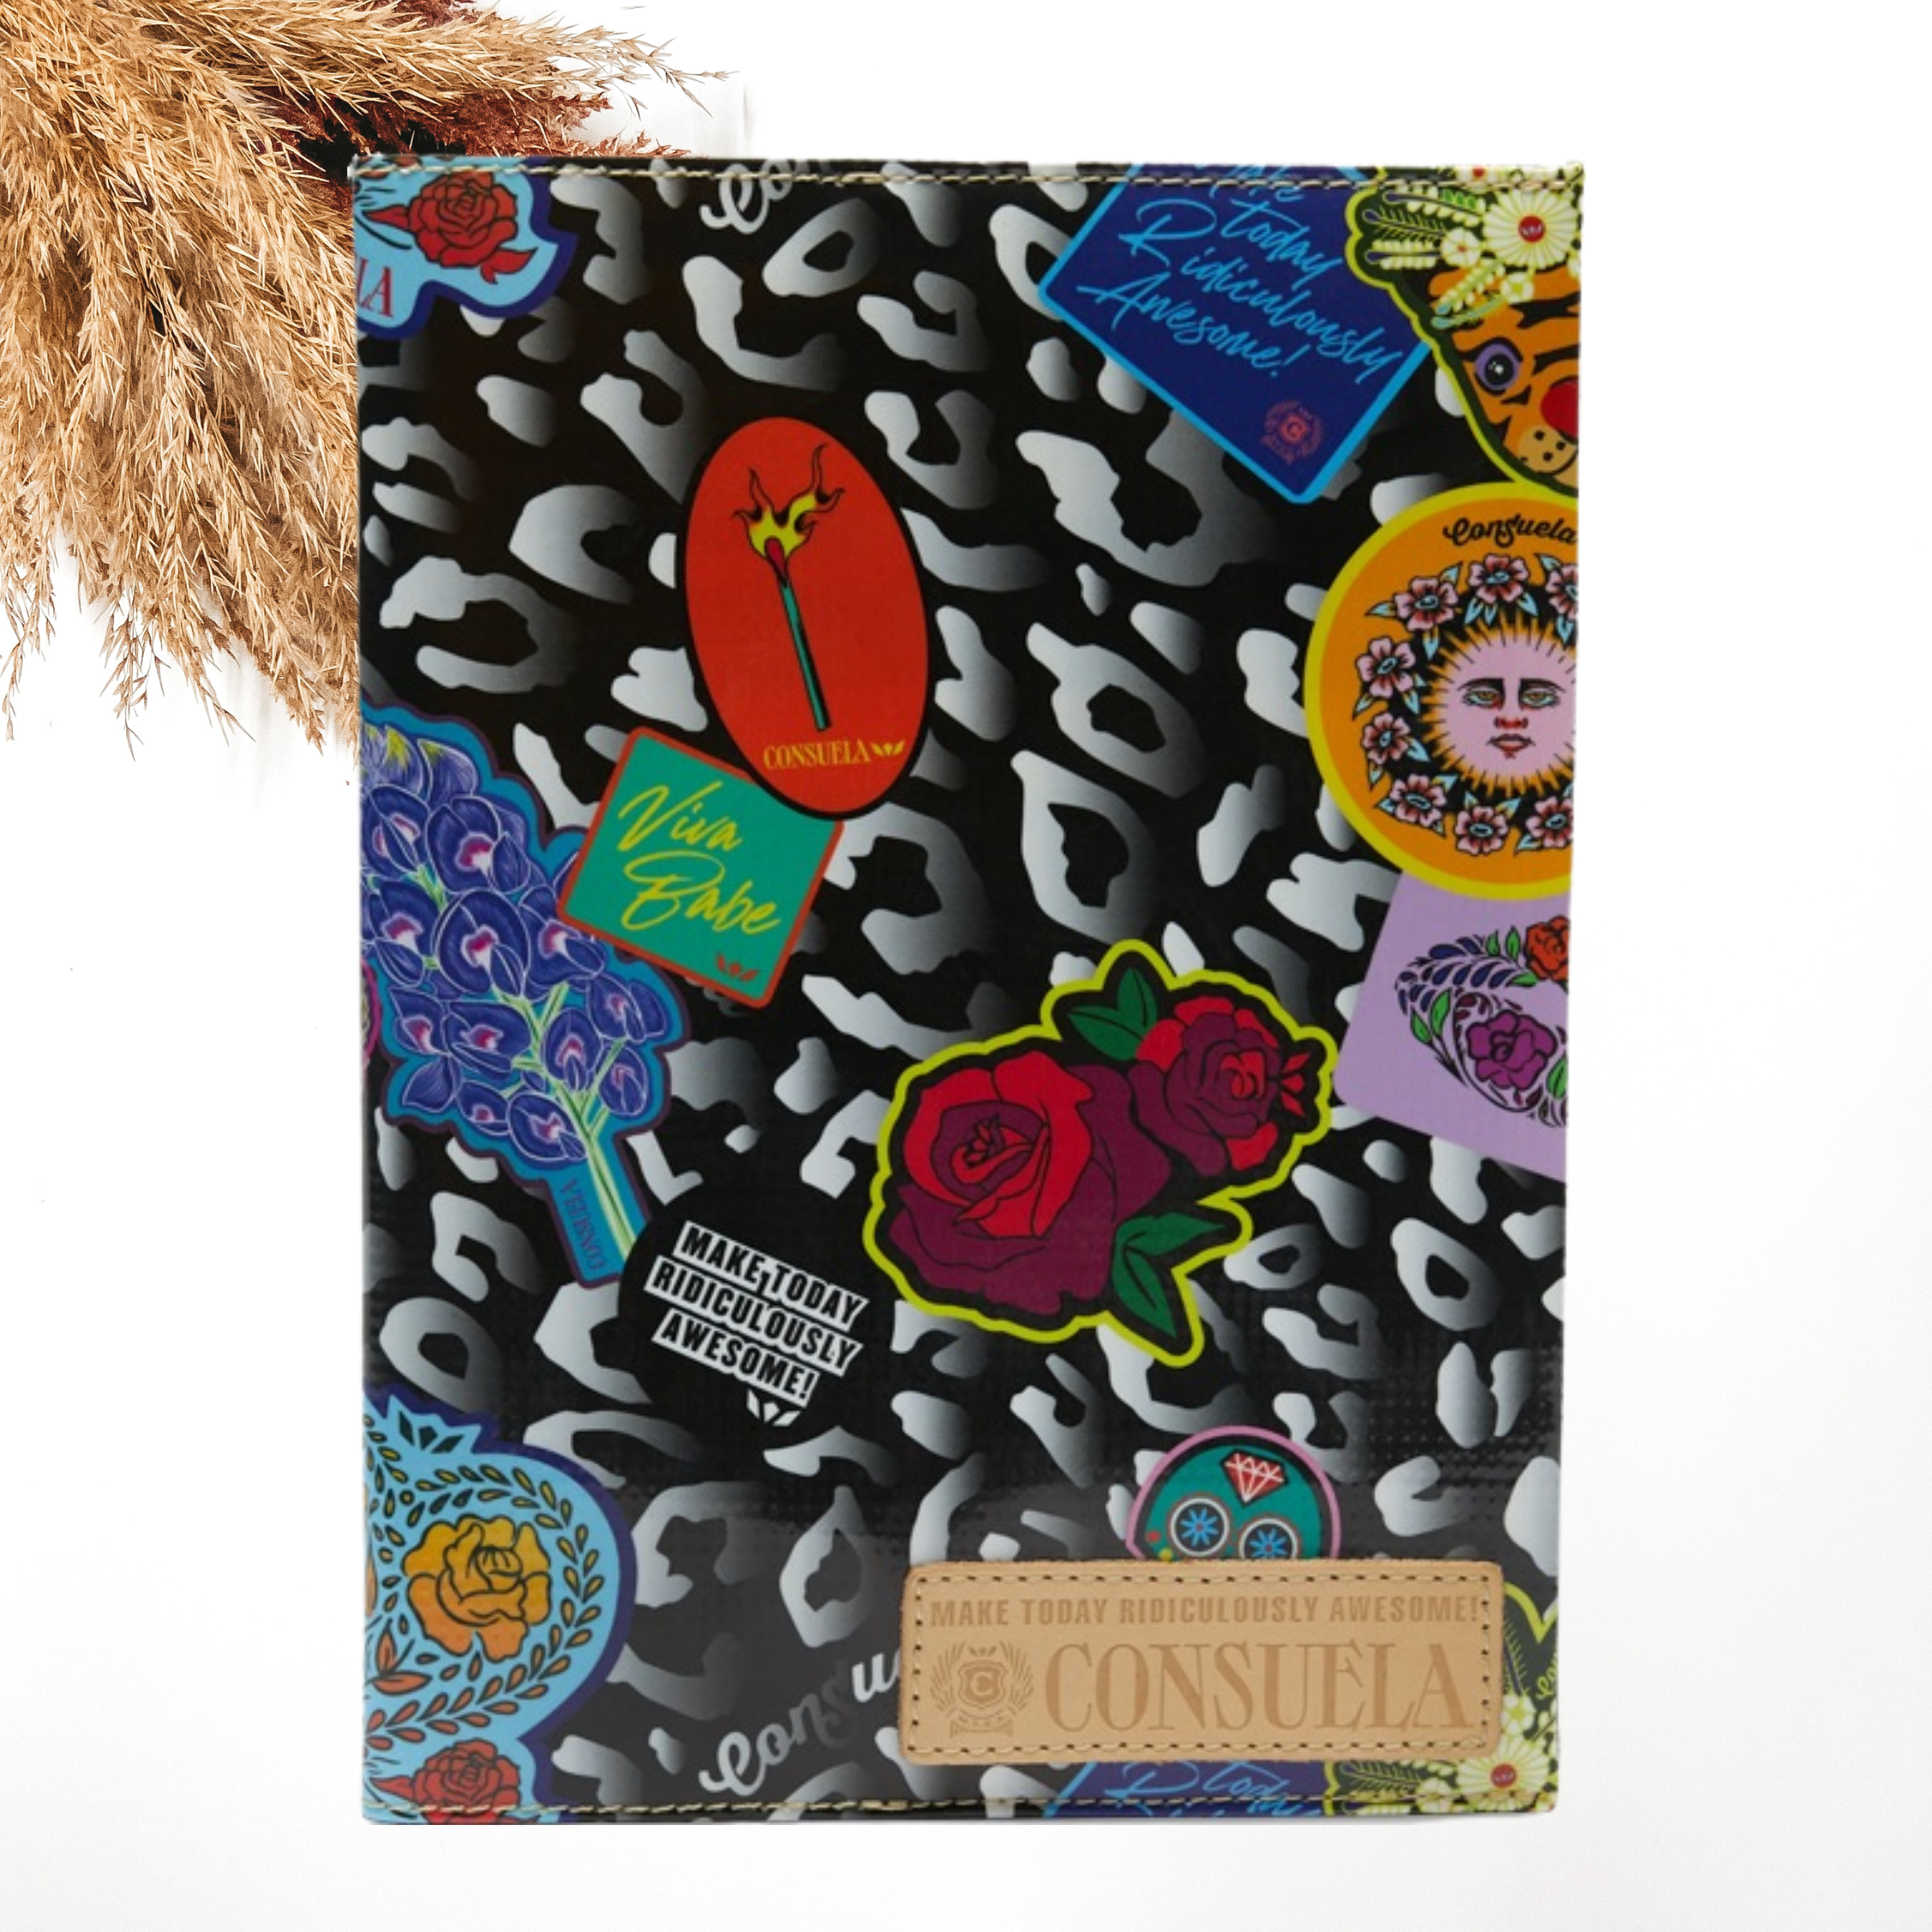 Pictured is a notebook cover with a mostly black with grey leopard print design. It also includes random sticker patches throughout and a light tan Concsuela patch on the bottom right corner. This notebook is pictured on a white background with pompous grass in the top left corner of the picture.